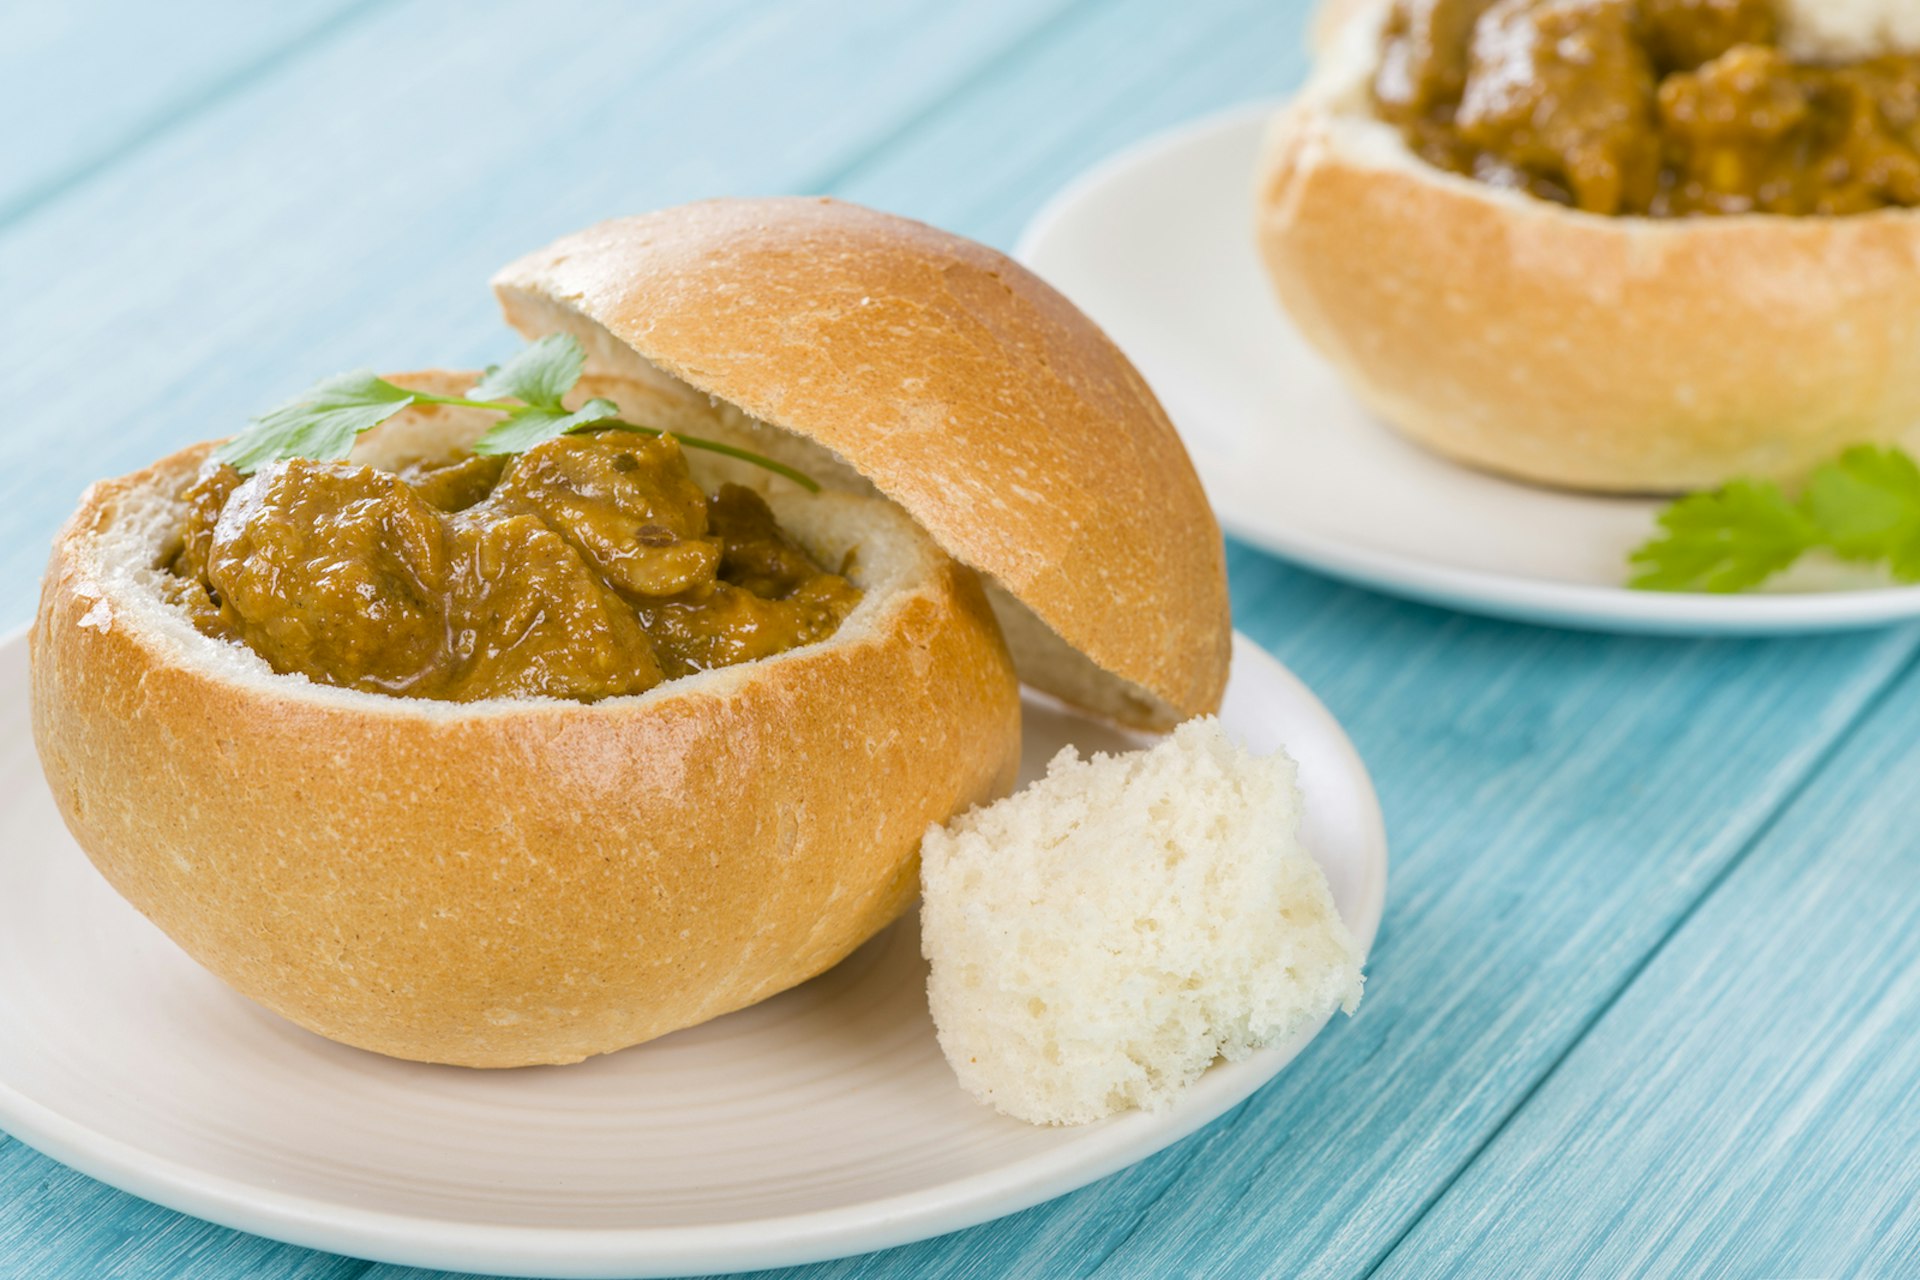 Bunny chow – a curry served in a bread bowl